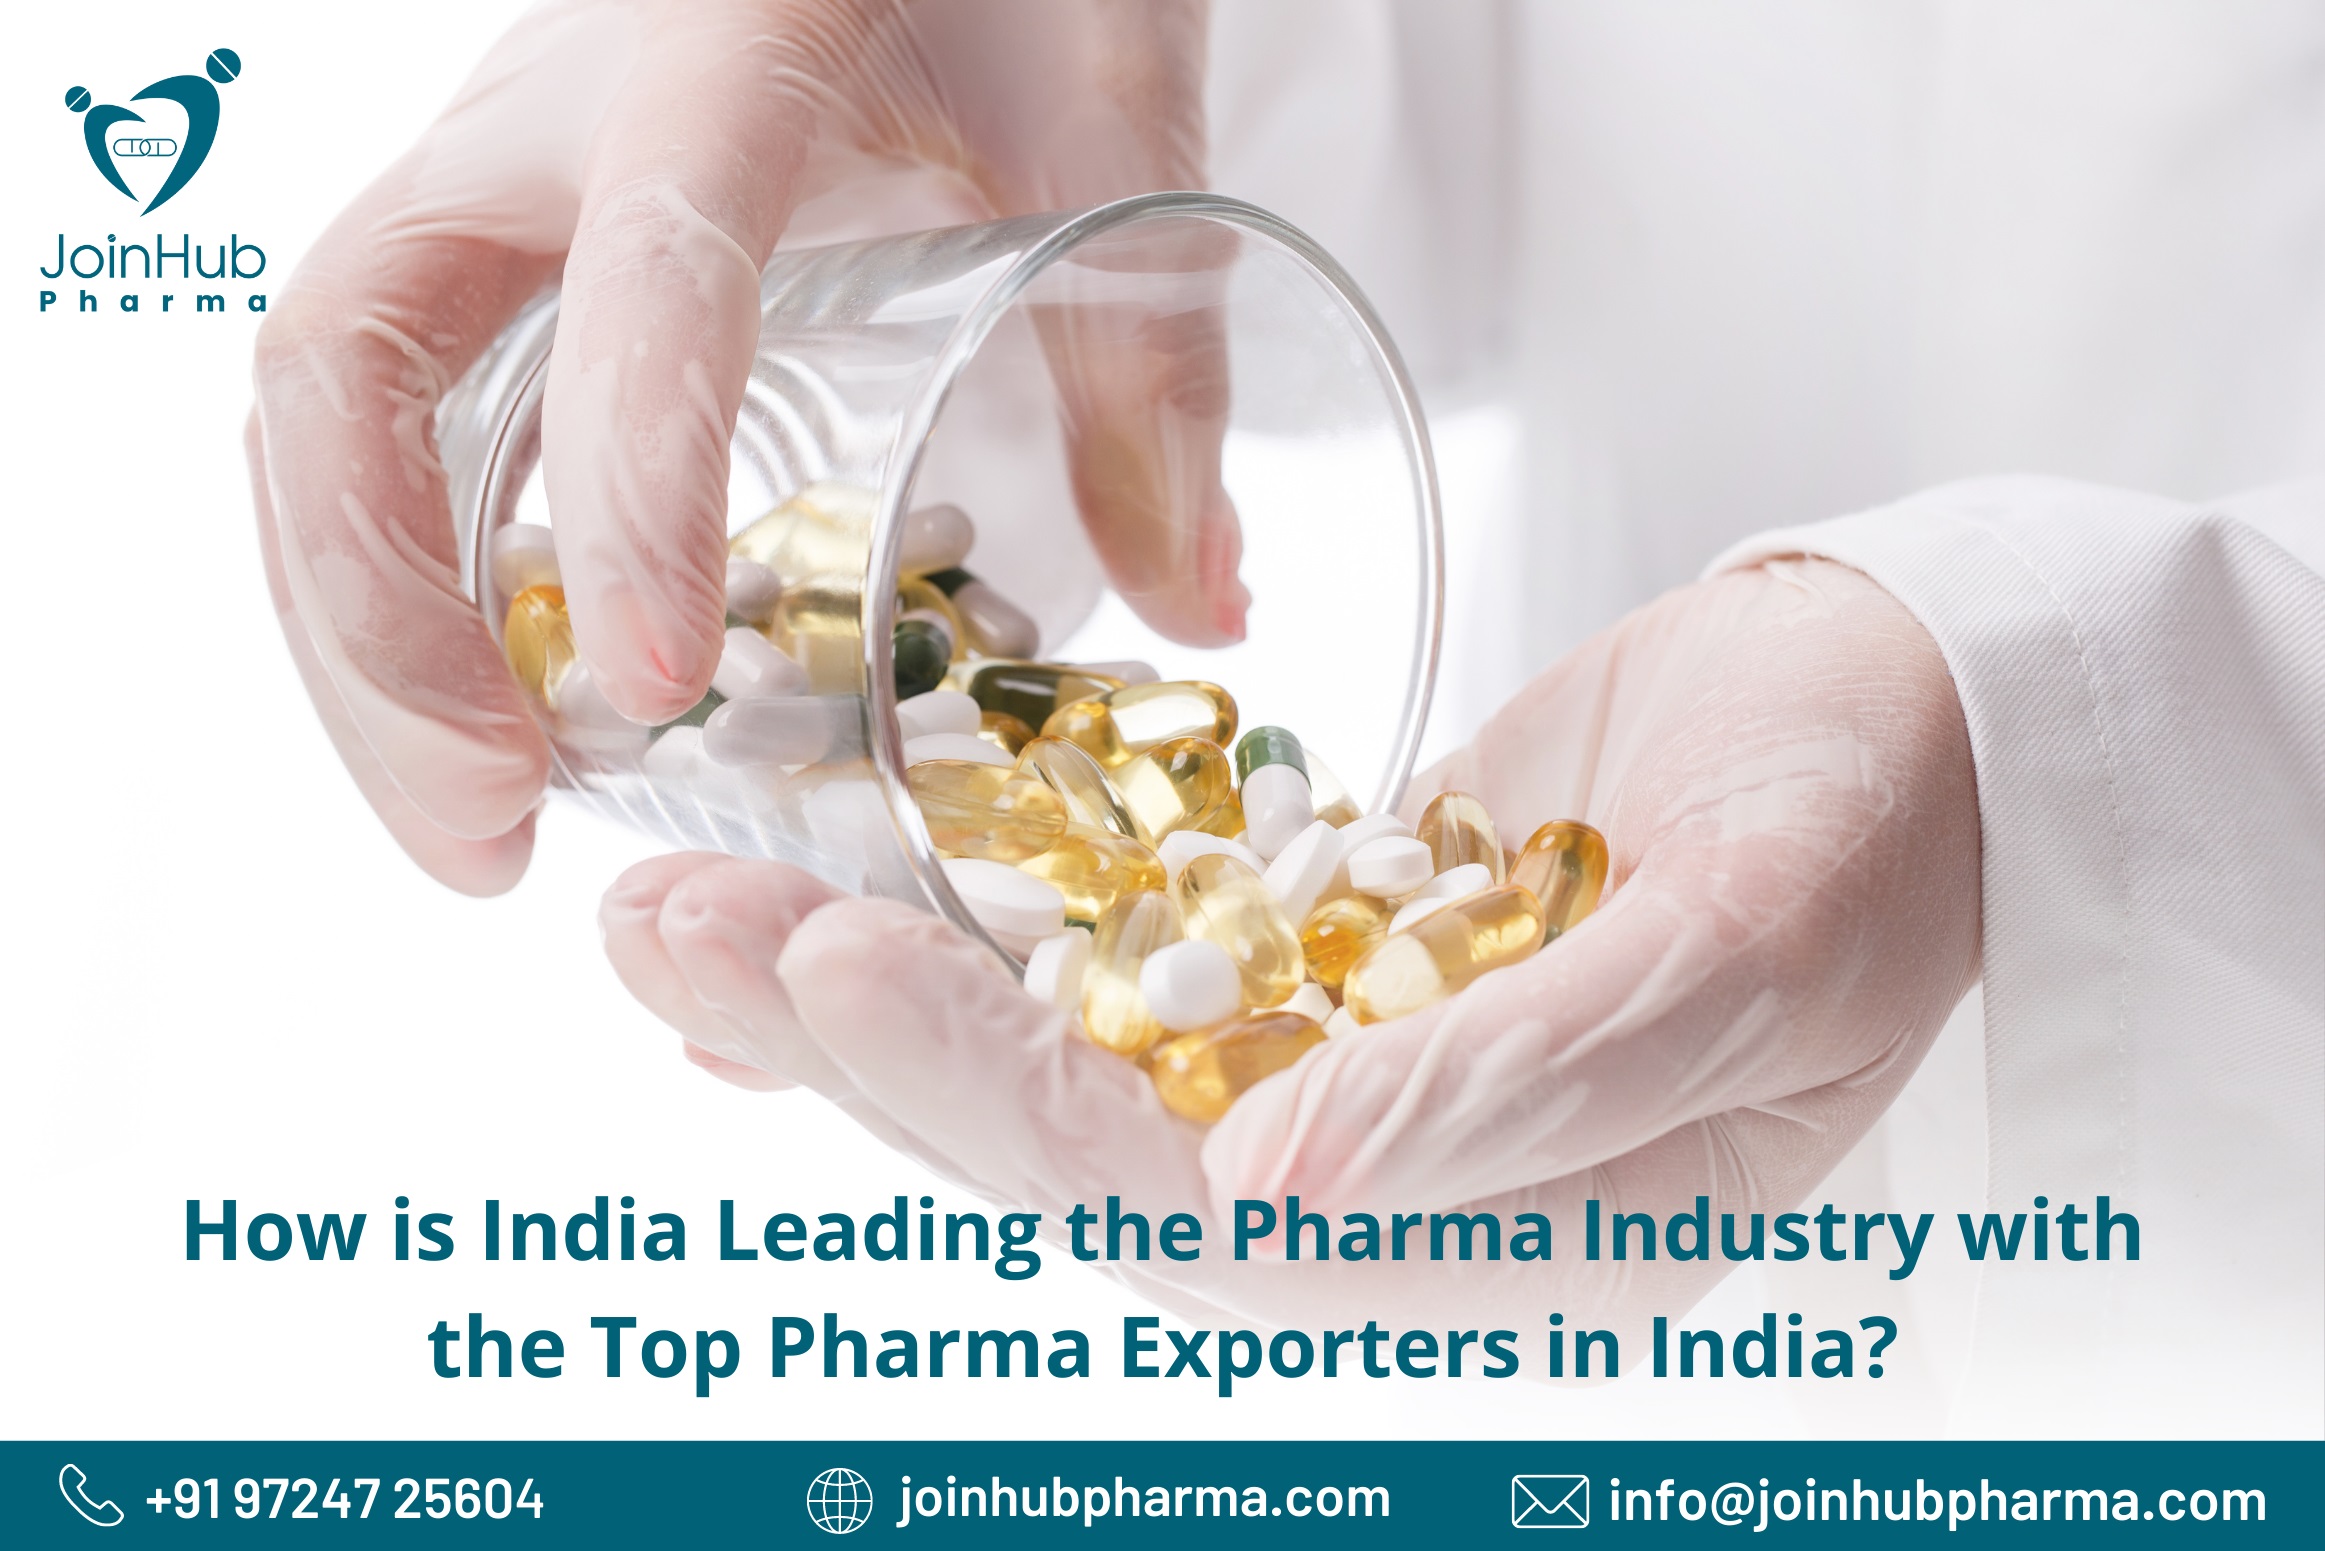 How is India leading the pharma industry with the Top pharma exporters in India?